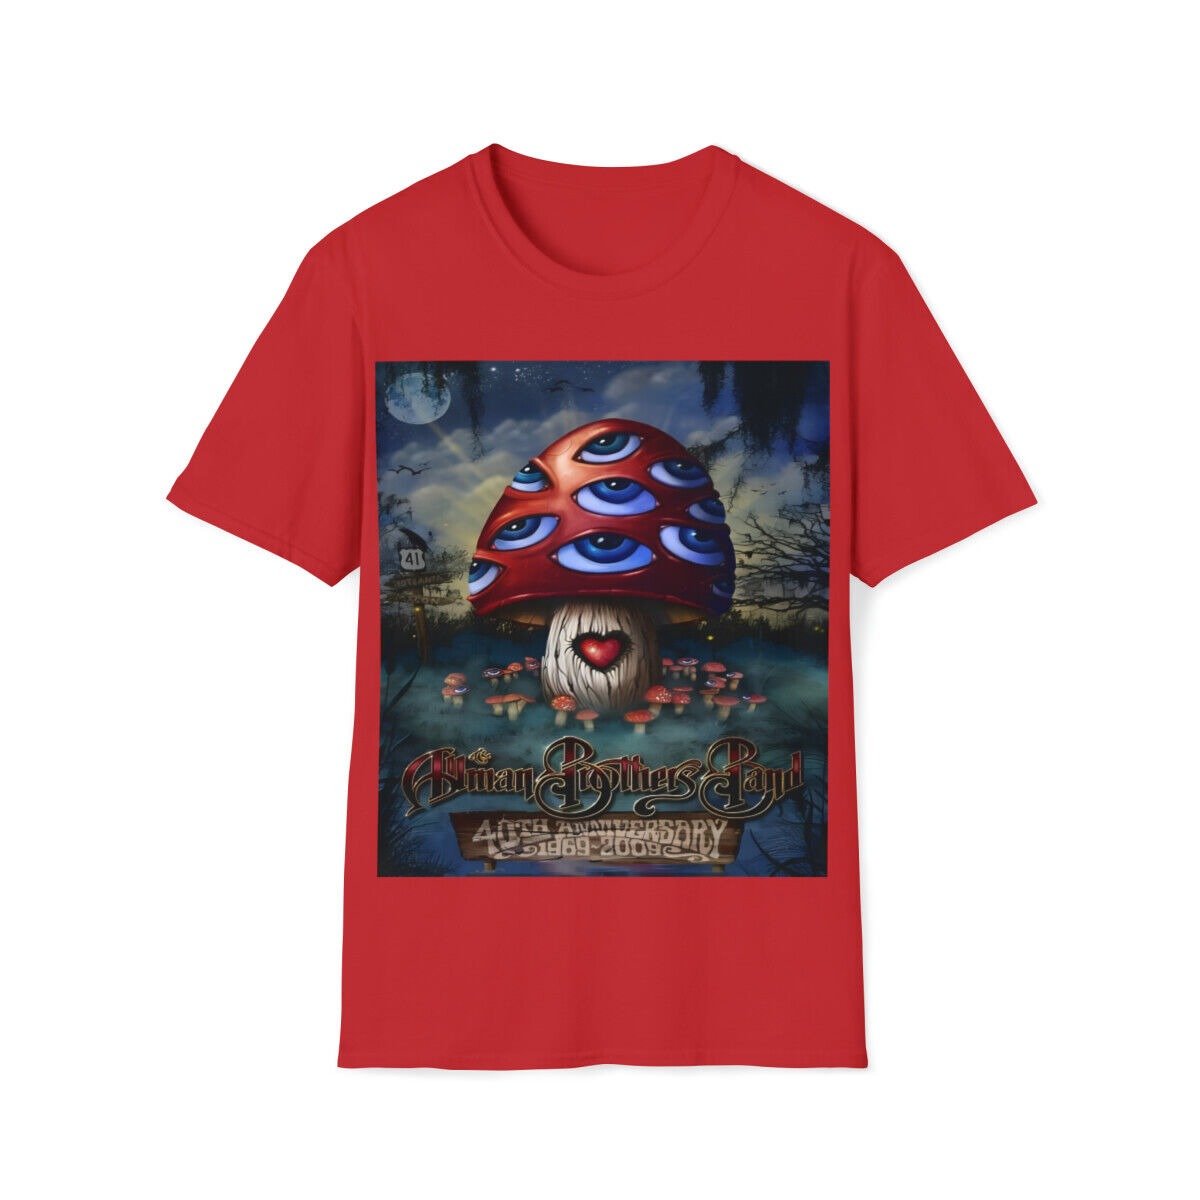 Soft Cotton T-Shirt. The Allman Brothers Band Red